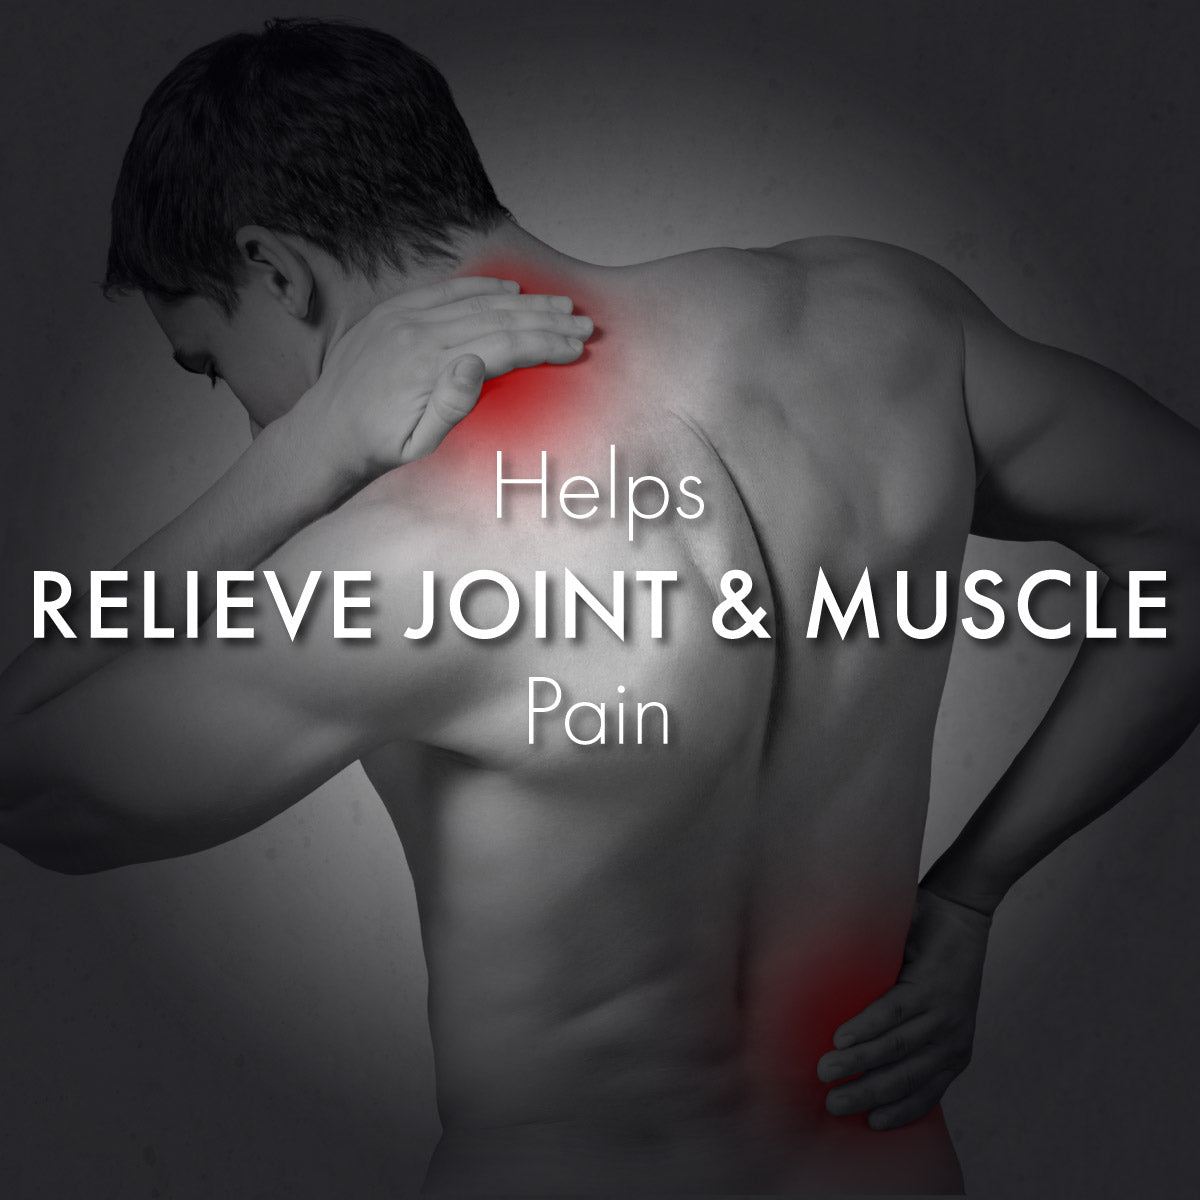 Pain Relief Oil: Ayurvedic Oil For Relief From Joint & Muscle Pain